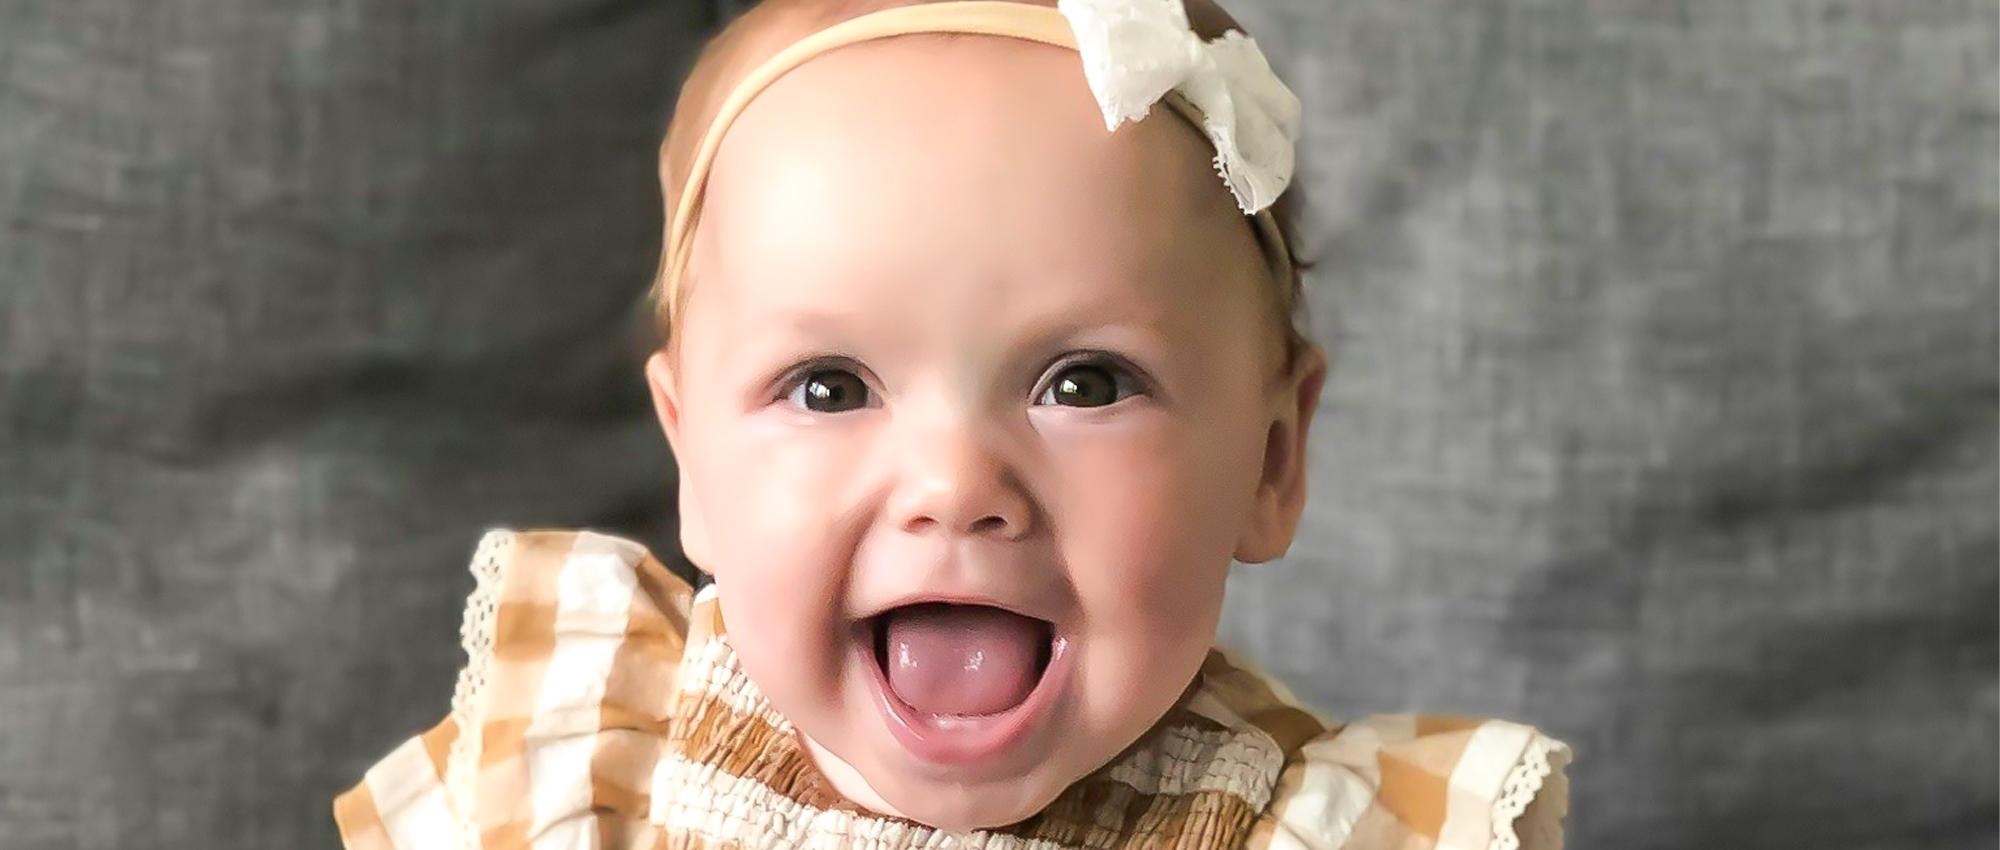 Image of baby blood recipient Madison Lewis sitting in front of a grey backdrop smiling.